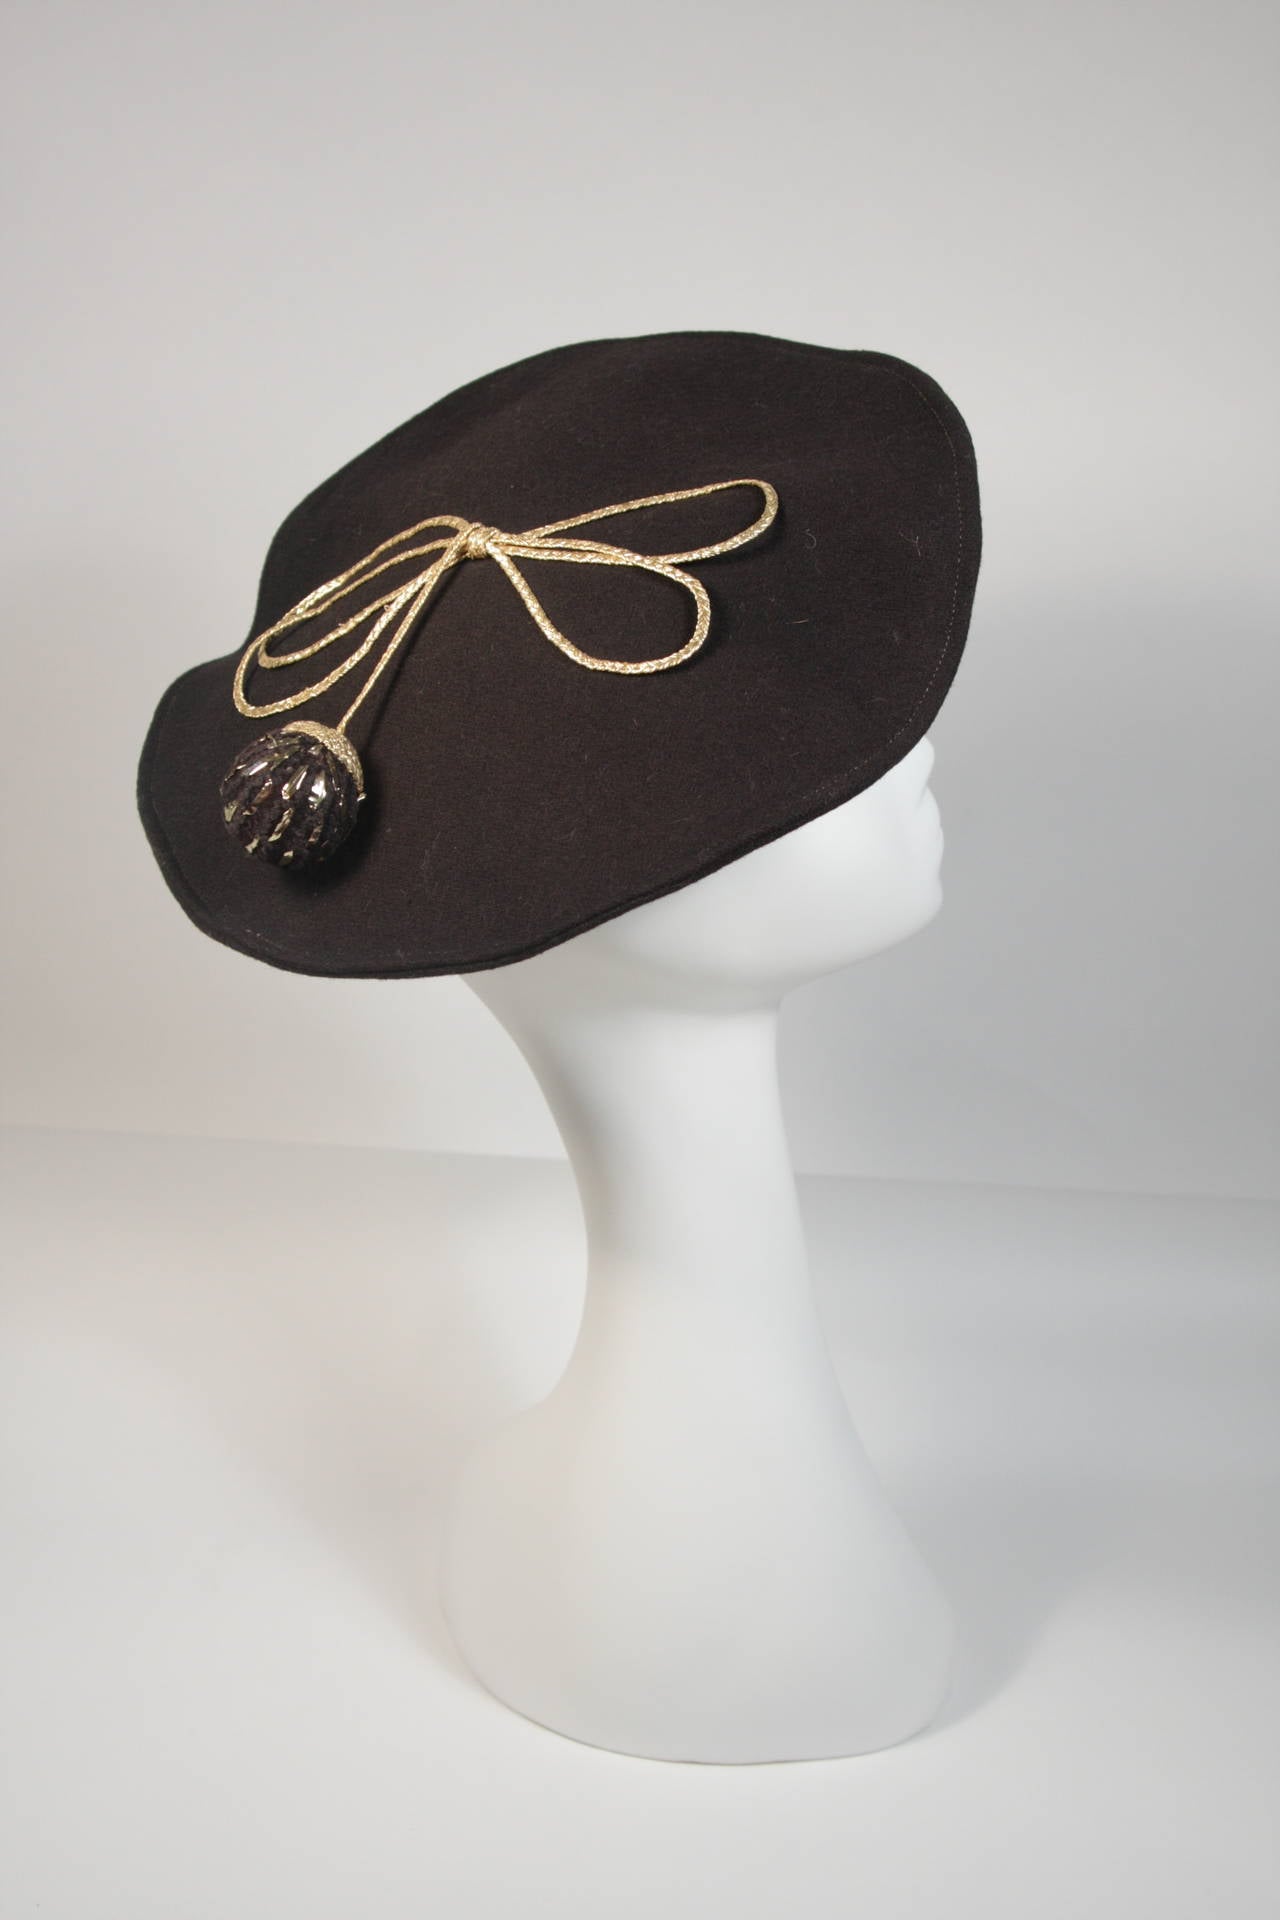 Yves Saint Laurent Rive Gauche Black Beret with Knit Ball In Excellent Condition For Sale In Los Angeles, CA